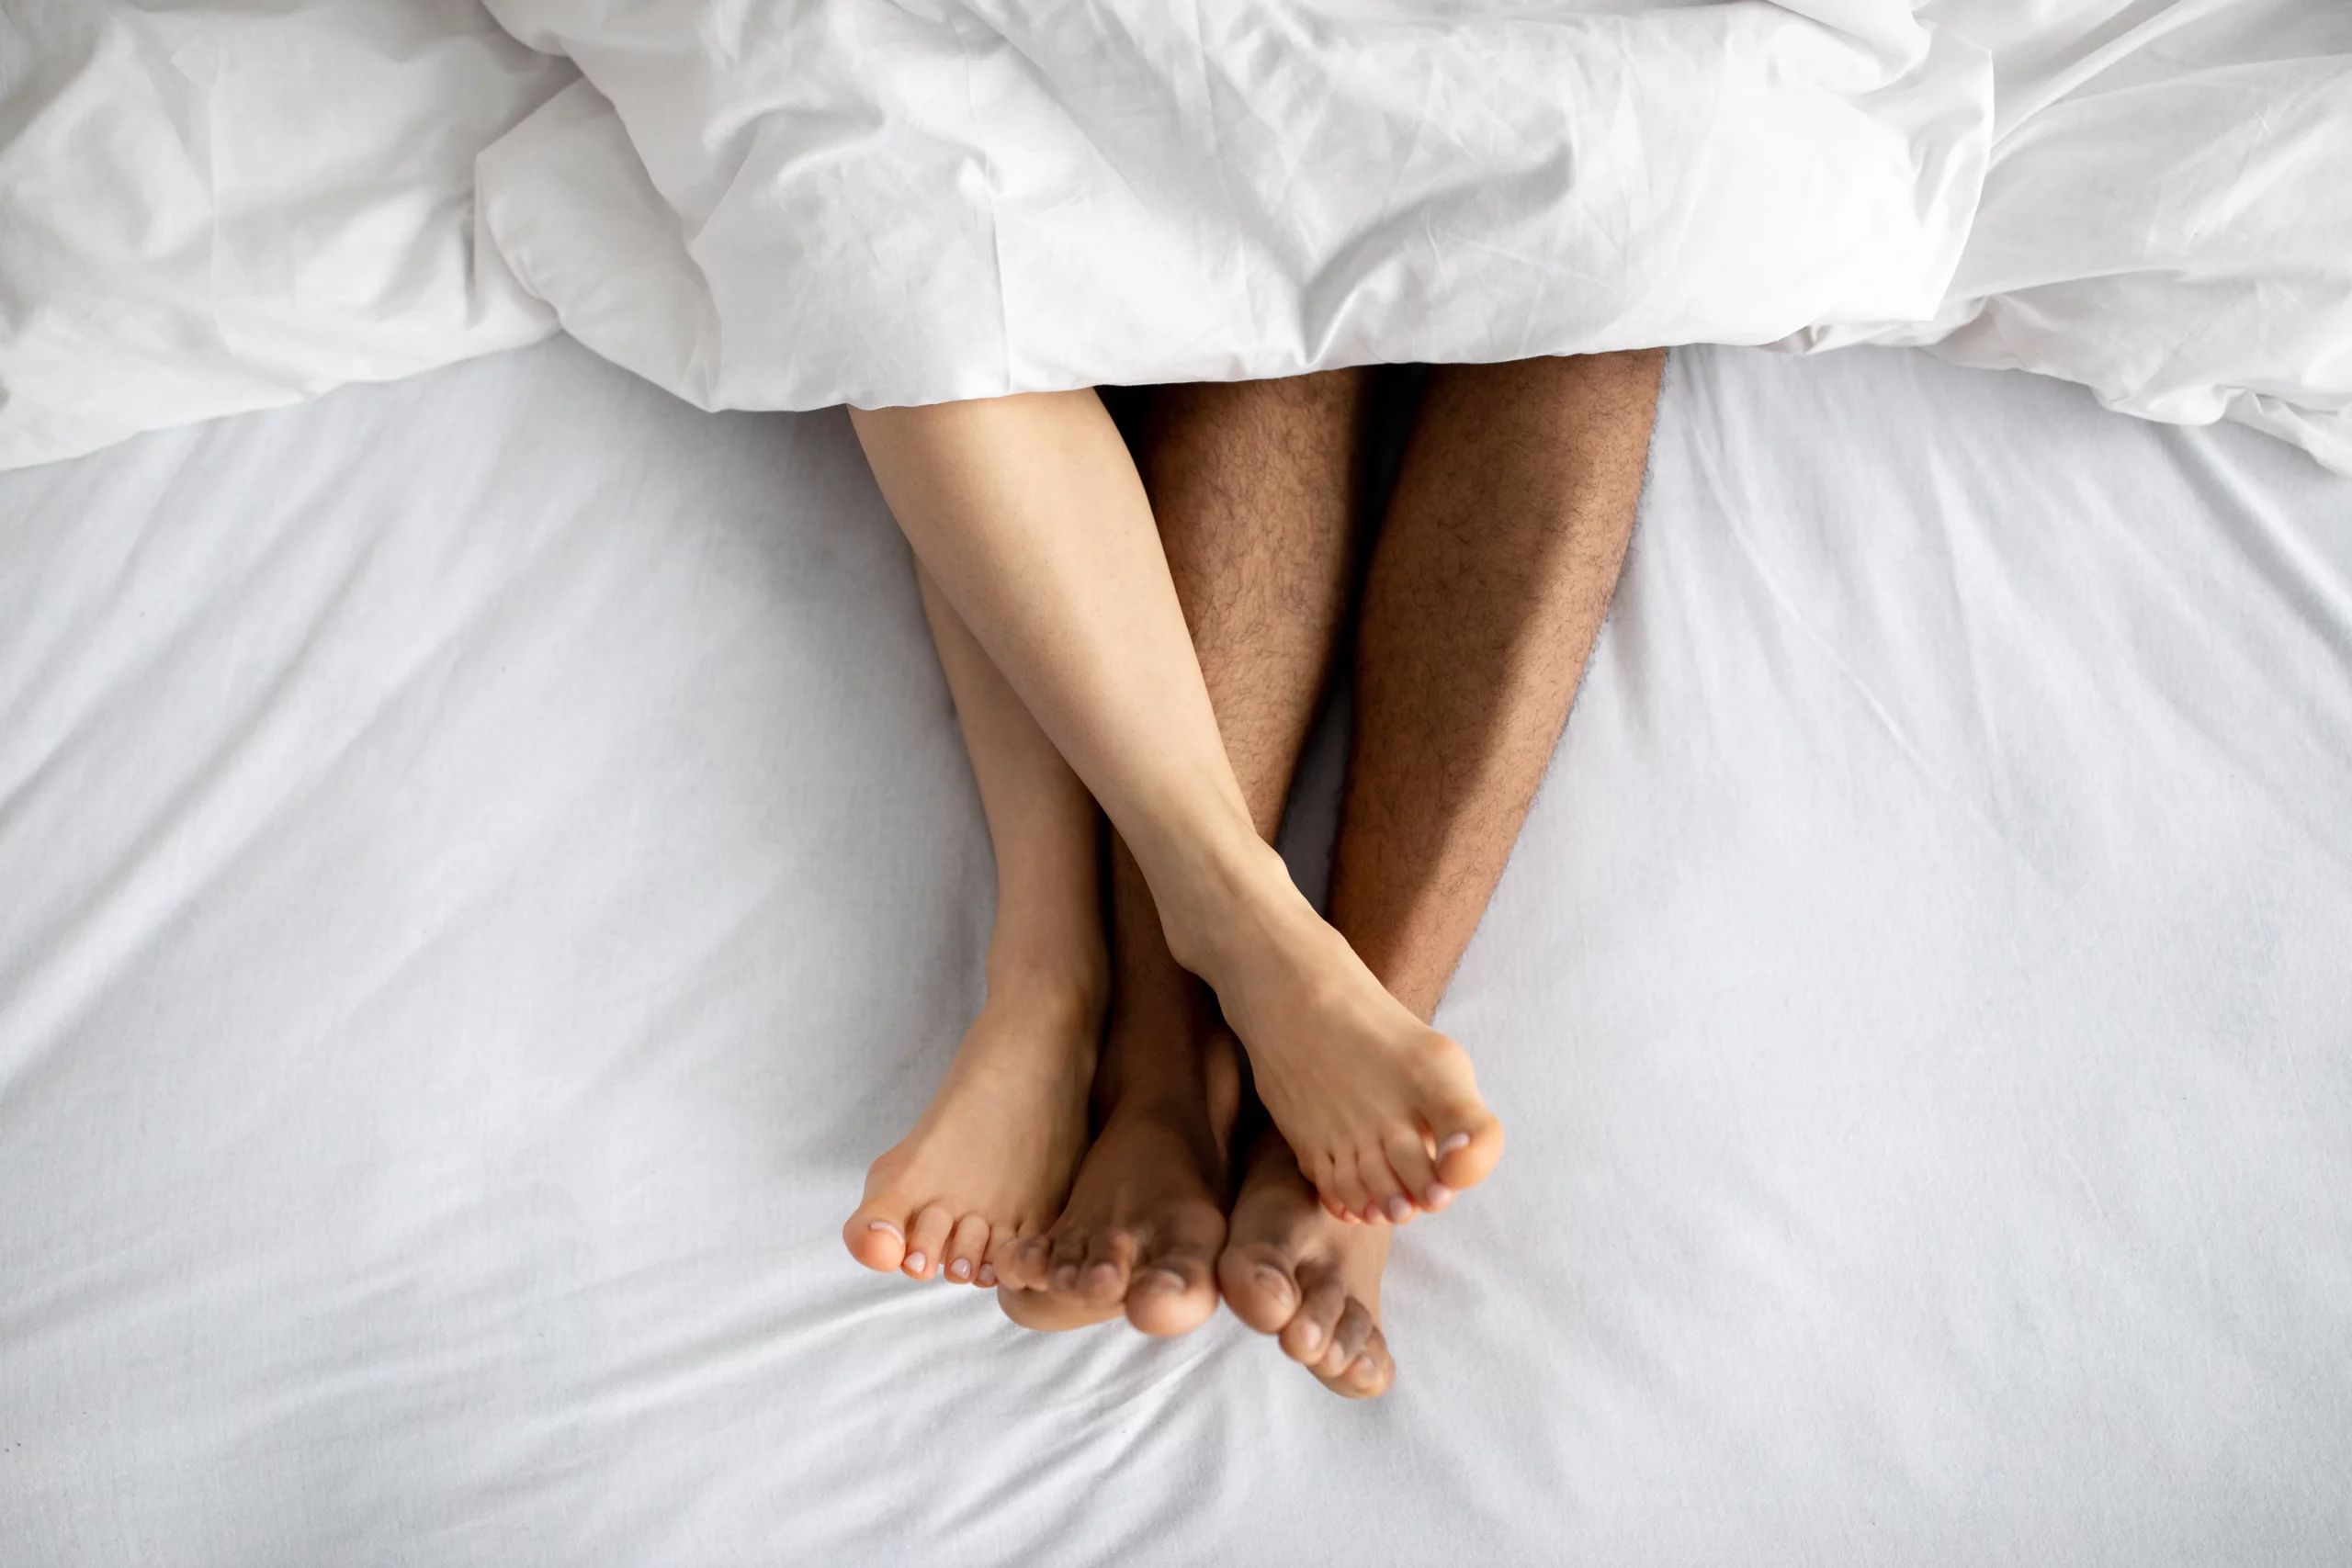 top view of a couple's feet naked and intertwined on a white sheet